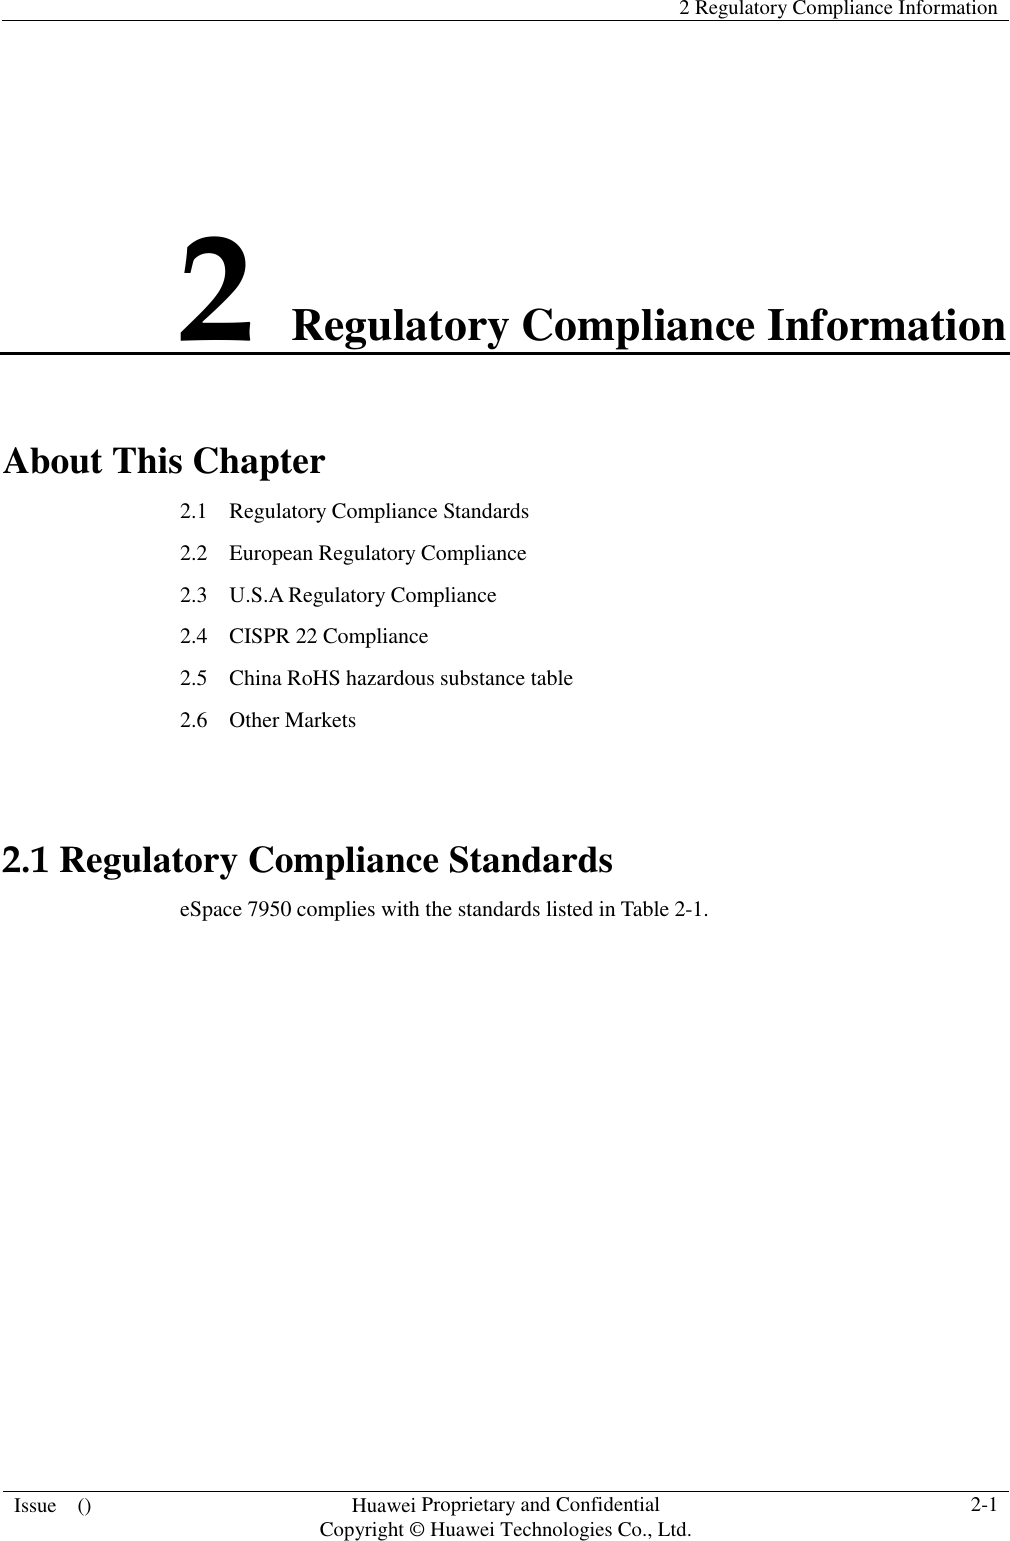    2 Regulatory Compliance Information  Issue    ()  Huawei Proprietary and Confidential                                     Copyright © Huawei Technologies Co., Ltd.  2-1  2 Regulatory Compliance Information About This Chapter 2.1    Regulatory Compliance Standards 2.2    European Regulatory Compliance 2.3    U.S.A Regulatory Compliance 2.4    CISPR 22 Compliance     2.5    China RoHS hazardous substance table   2.6    Other Markets  2.1 Regulatory Compliance Standards eSpace 7950 complies with the standards listed in Table 2-1. 